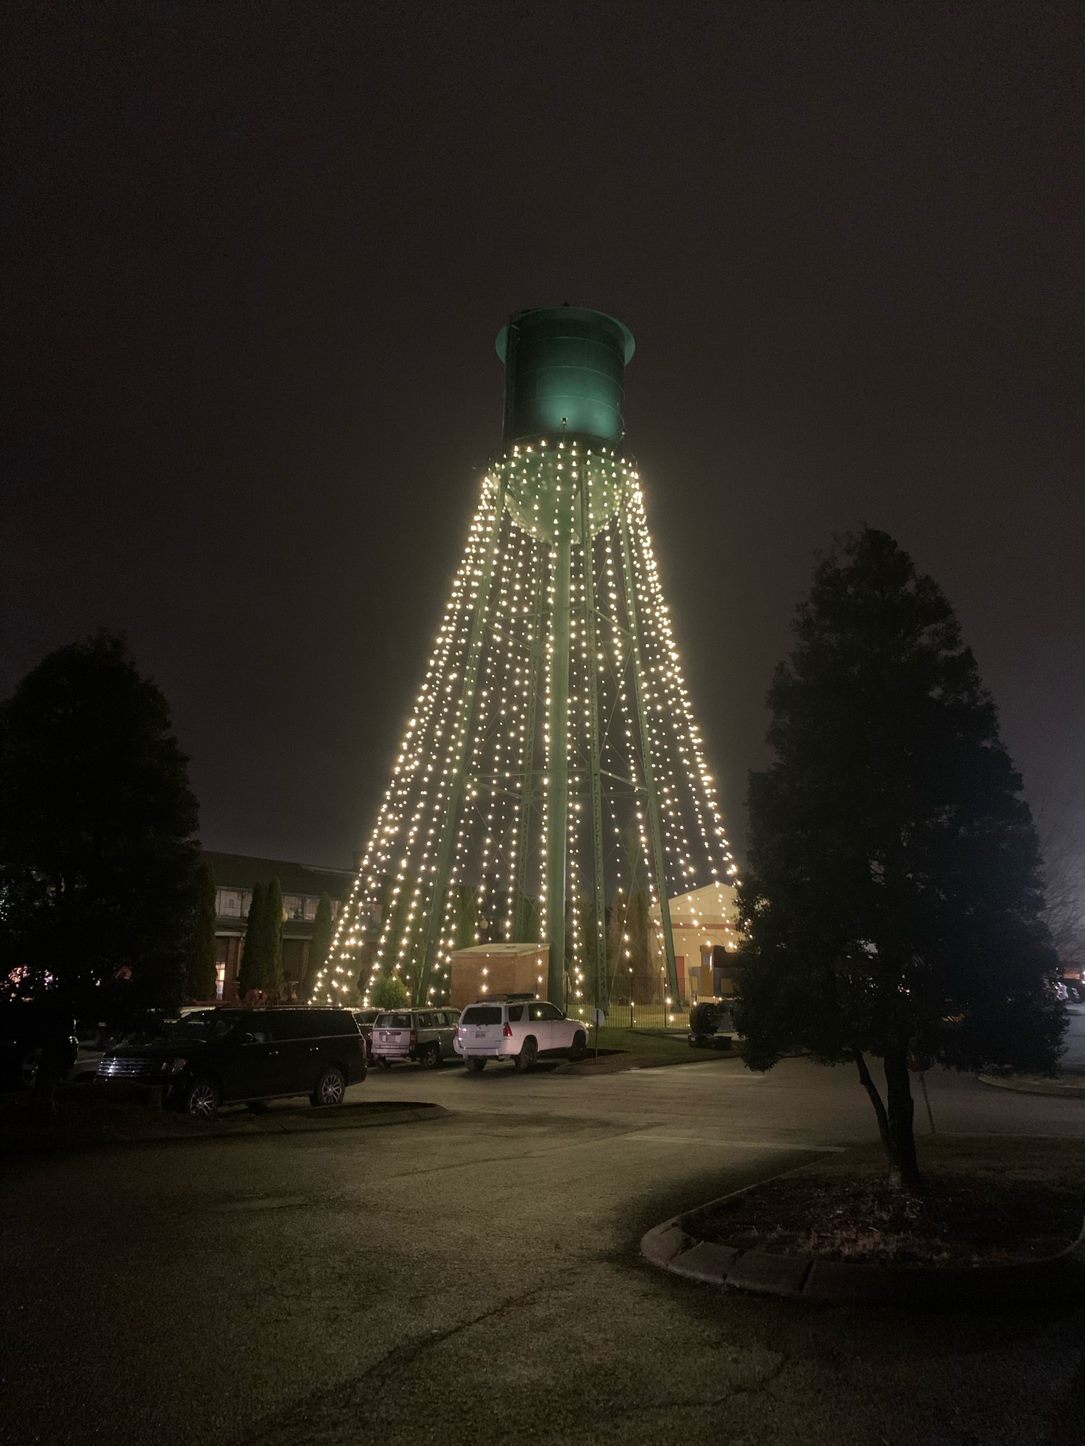 Water Tower “Christmas Tree” Lighting in downtown Franklin, TN.